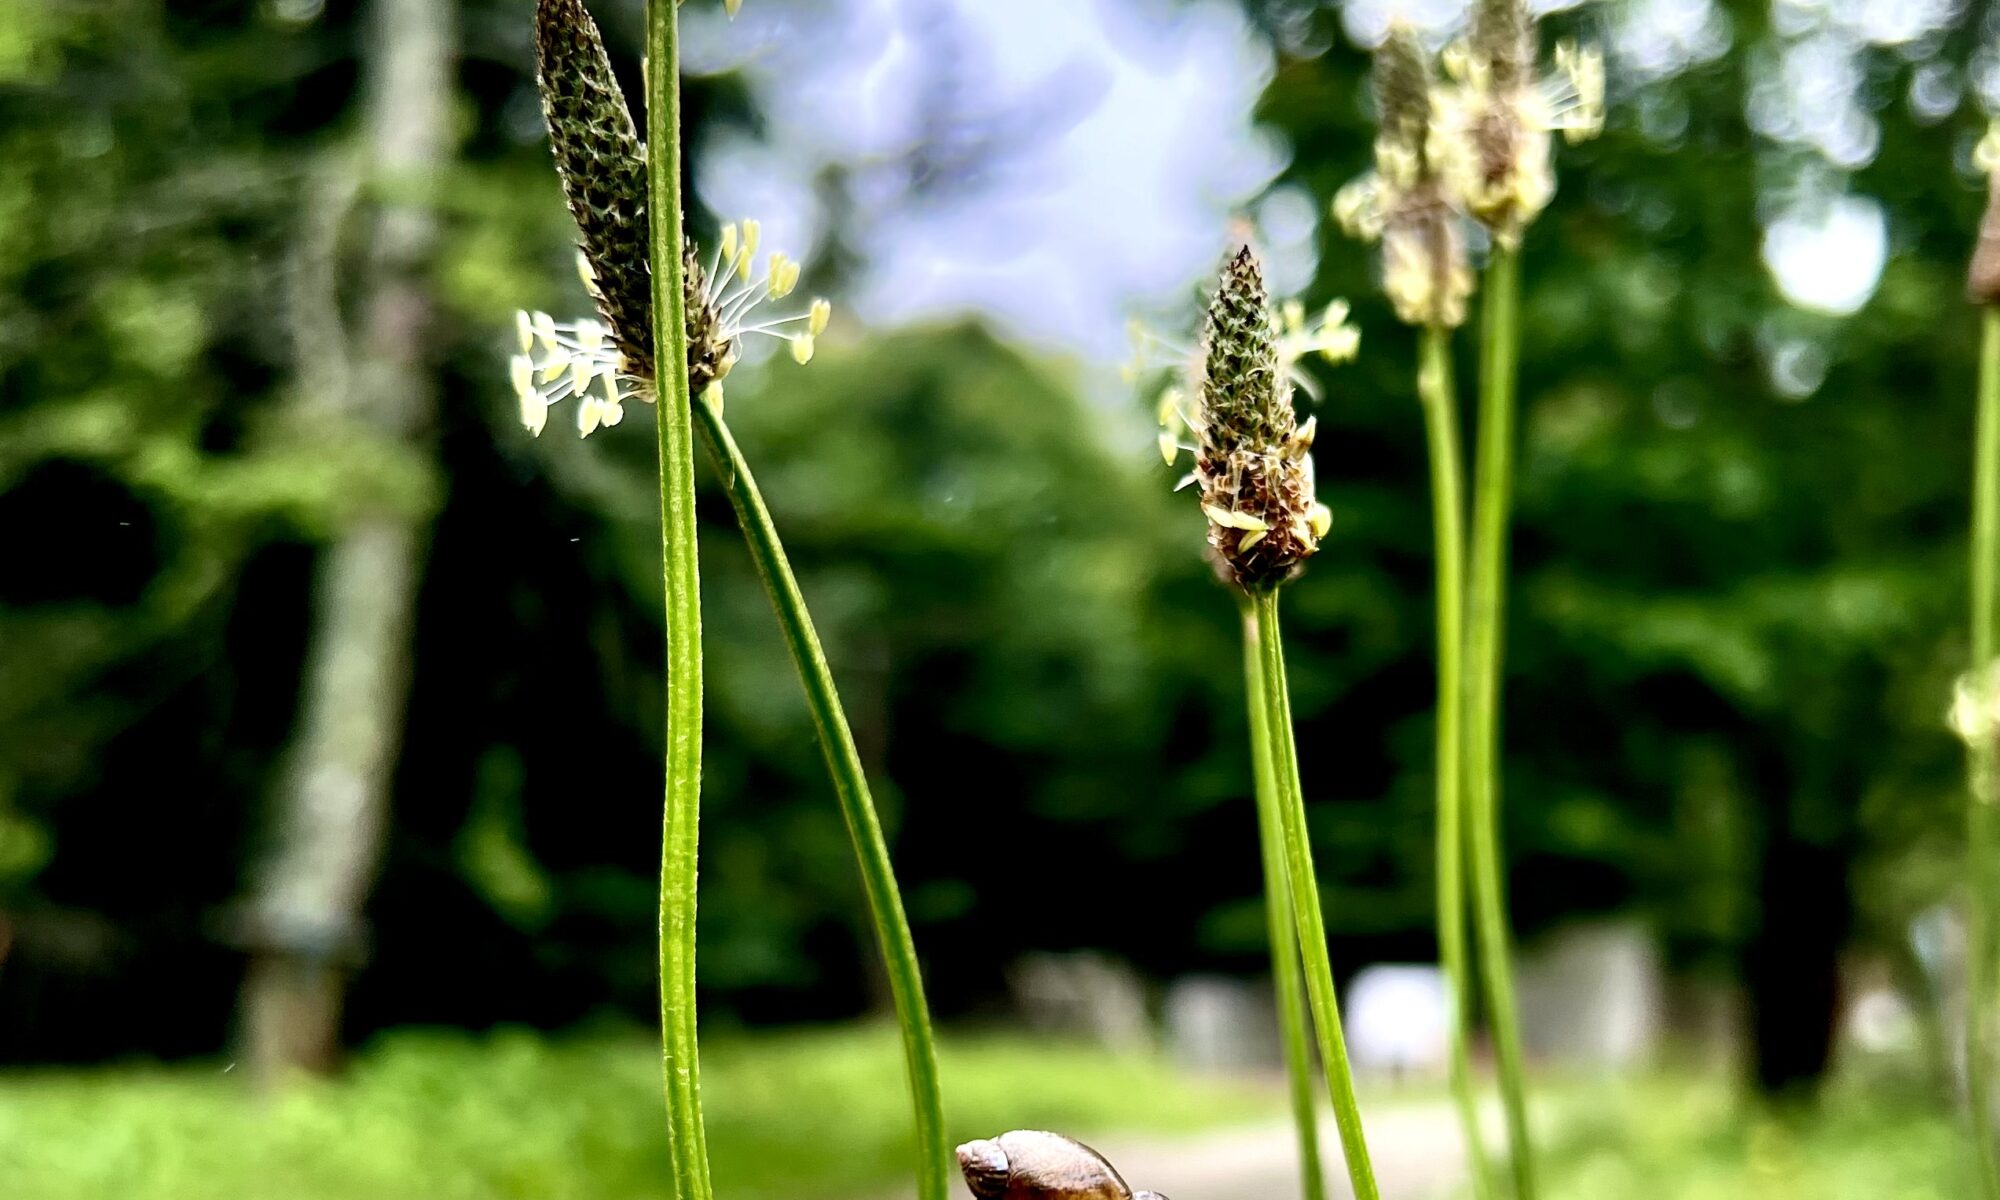 snail traveling on a seed head of grass with gravel road and tree in background